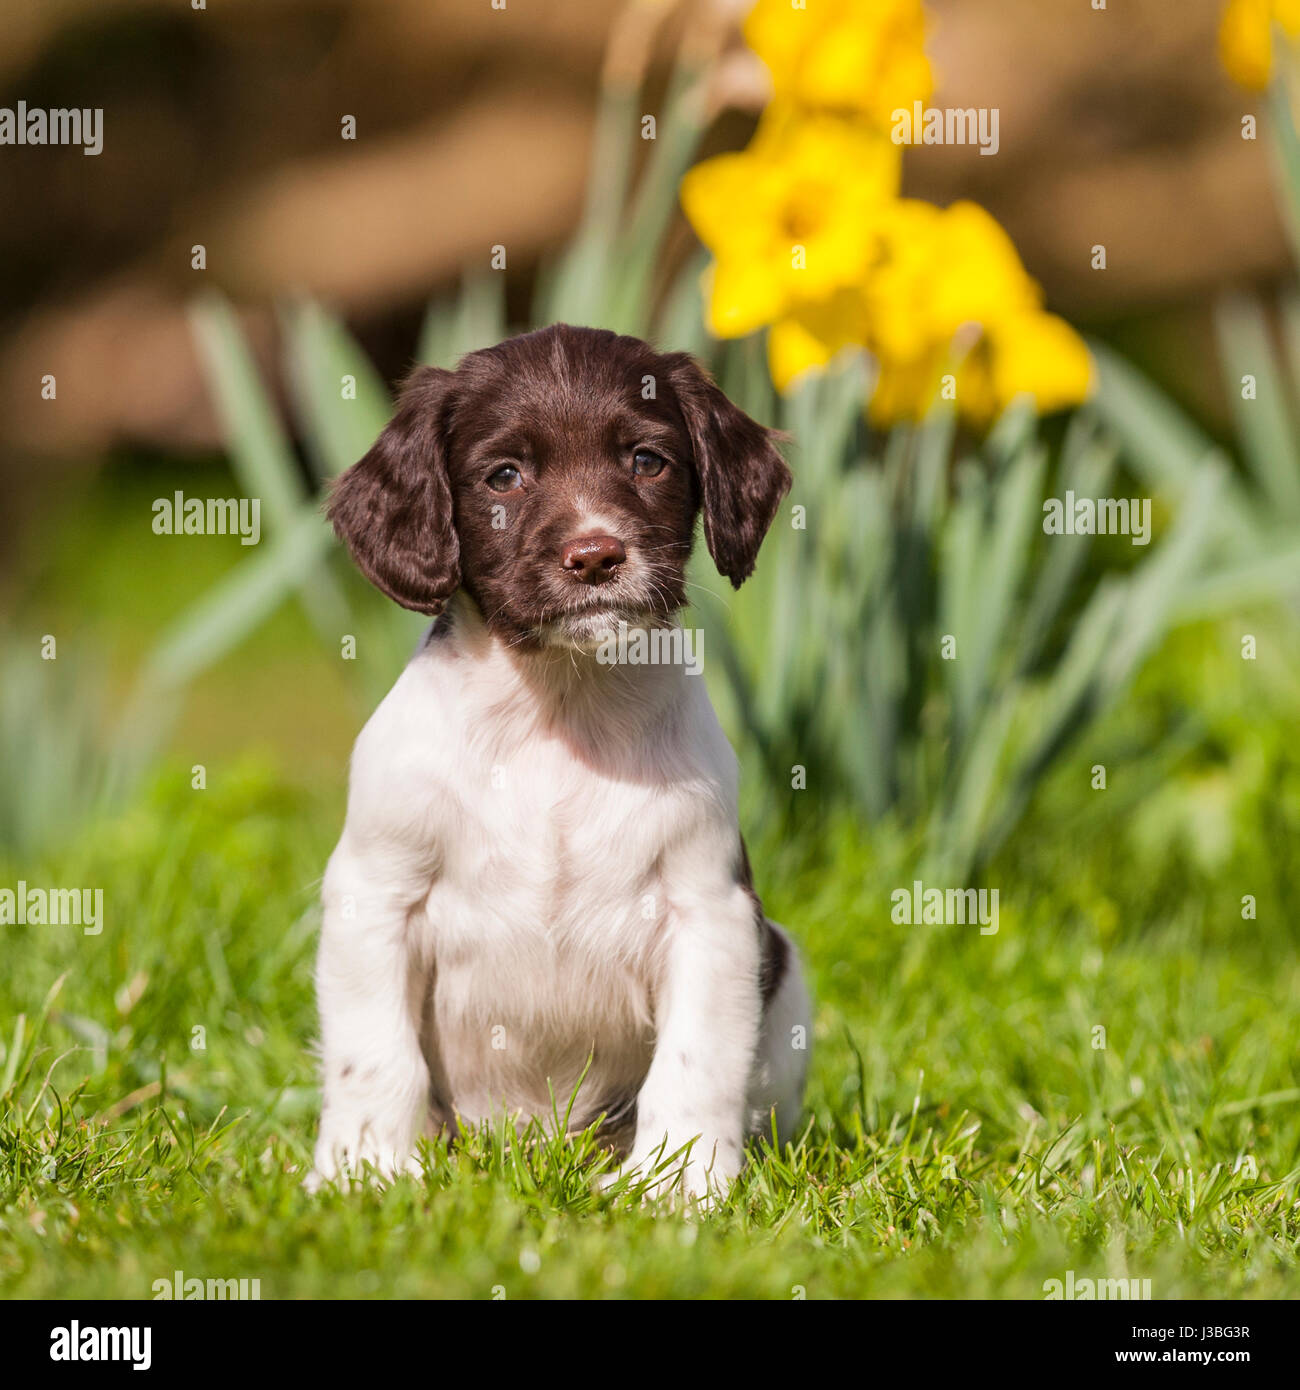 A 6 week old English Springer Spaniel puppy in the Uk Stock Photo